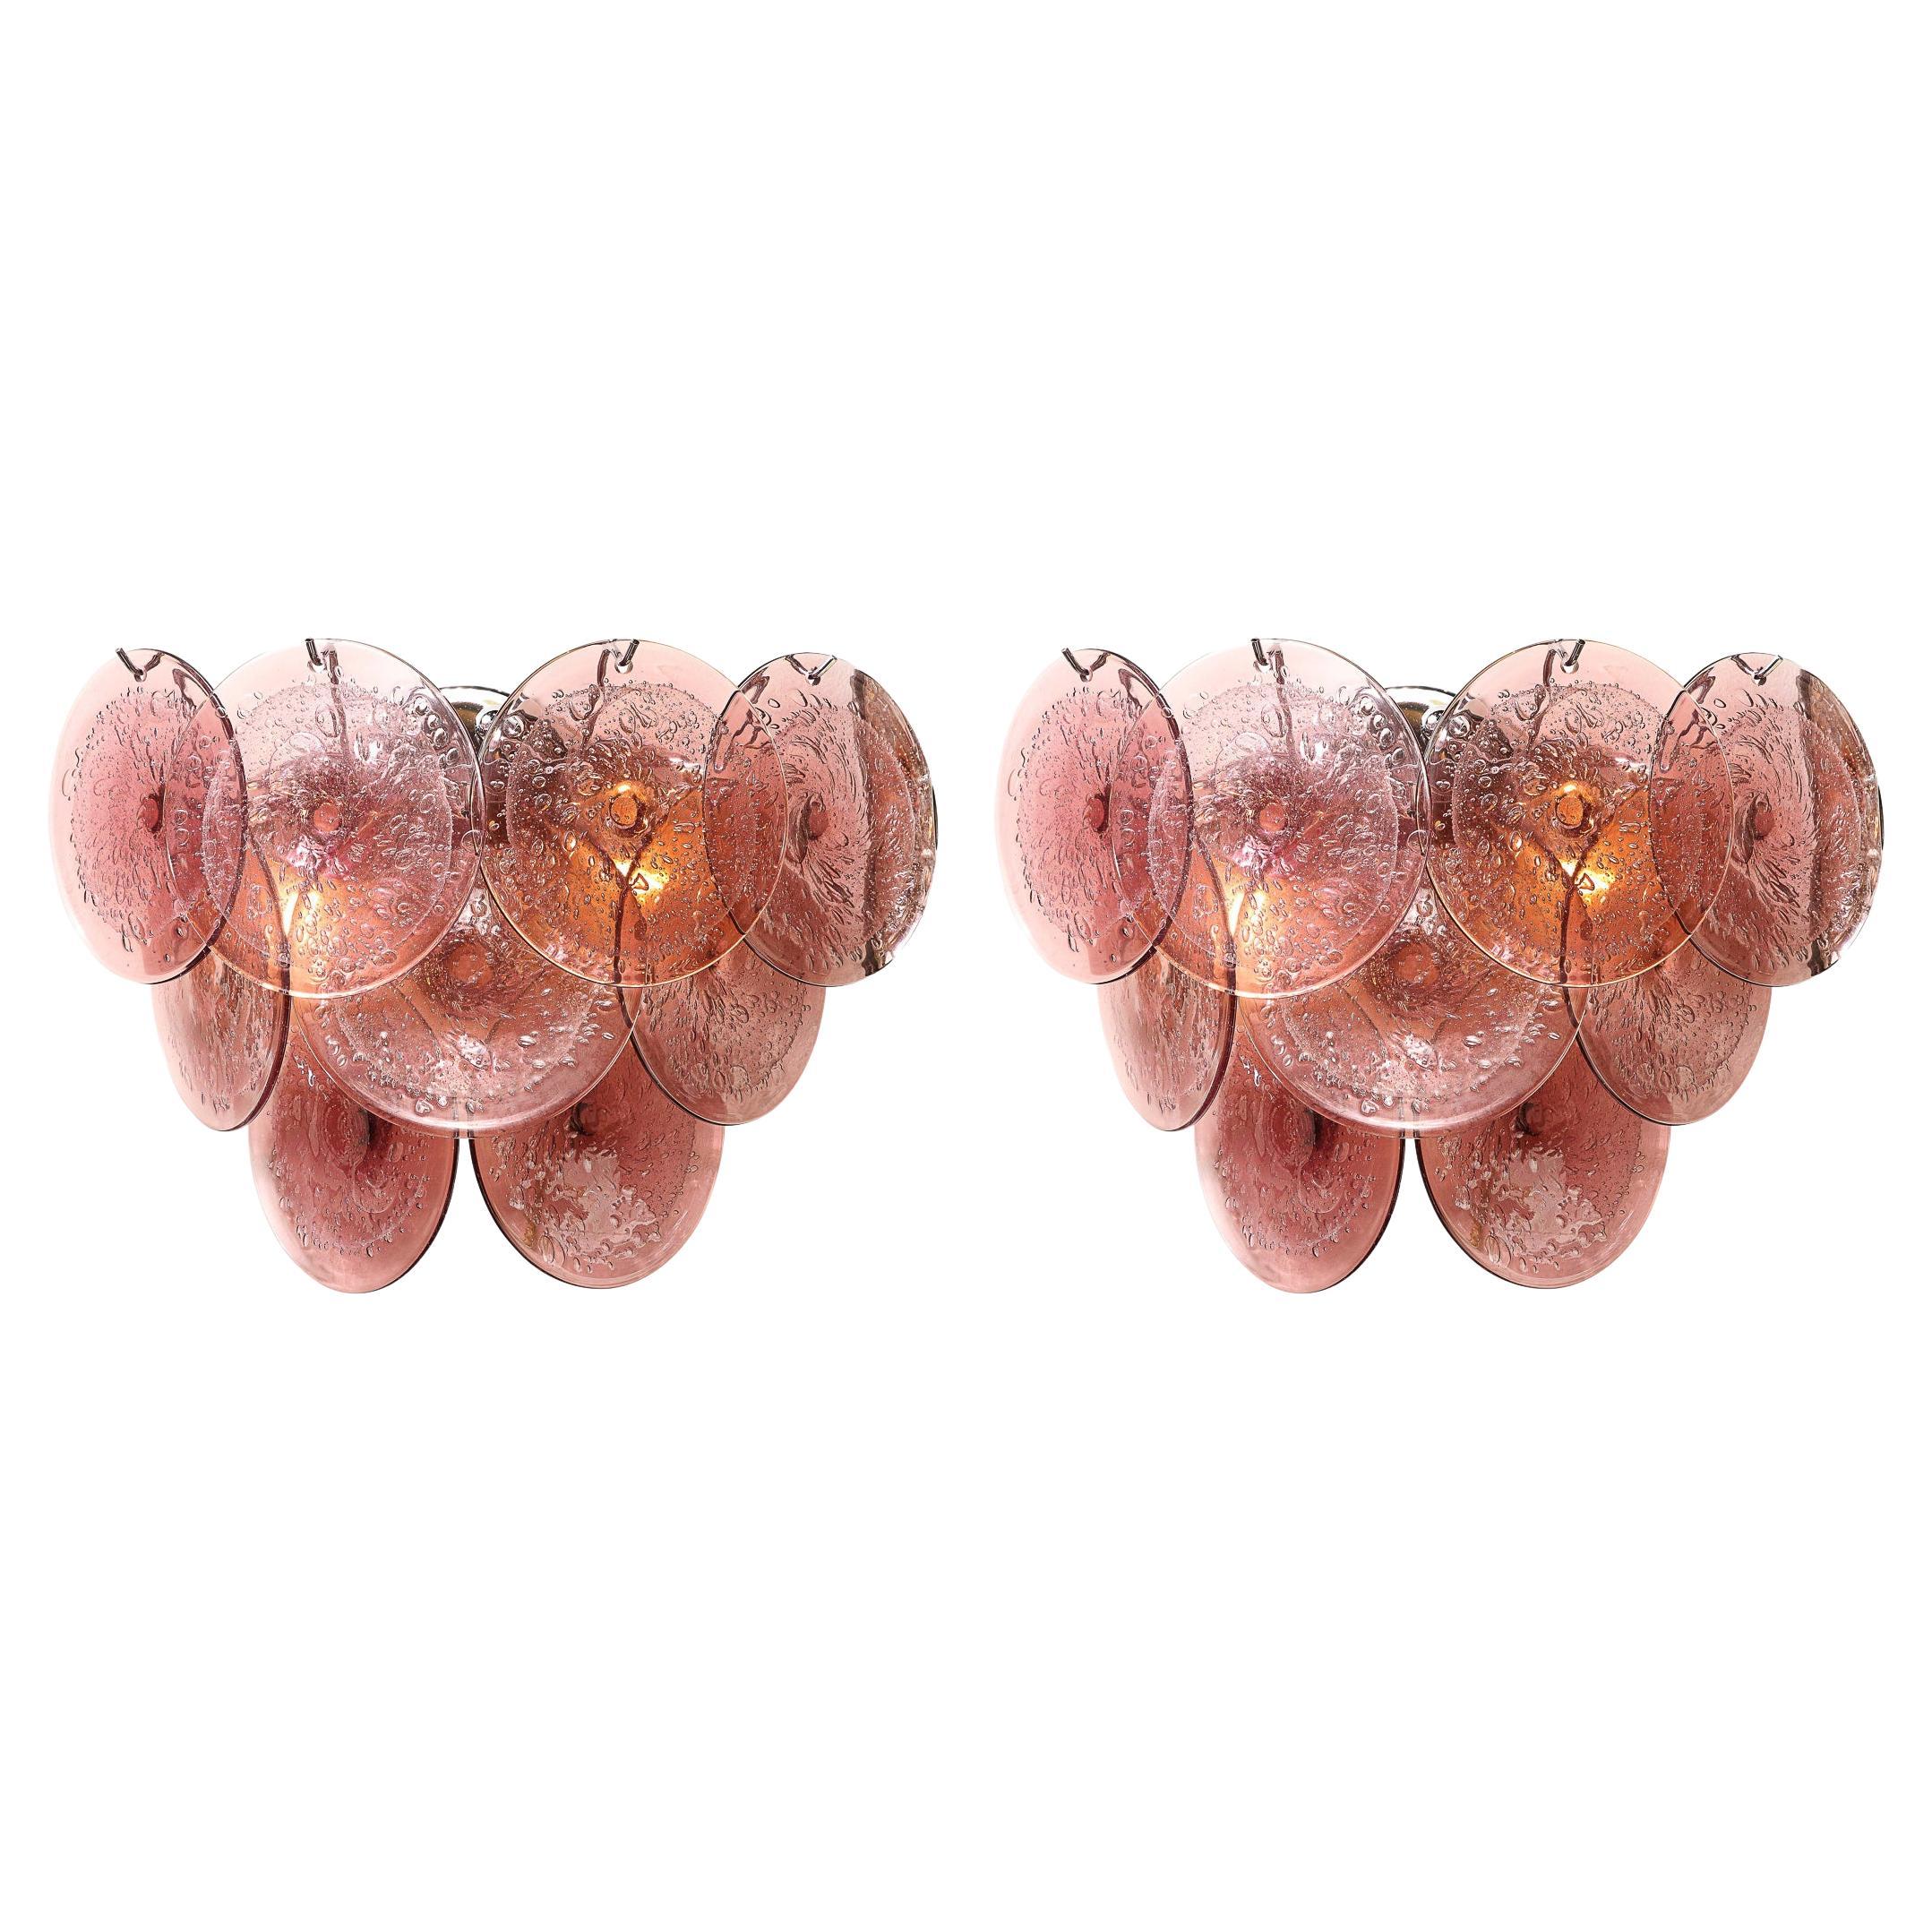 Pair of Modernist 9-Disc Sconces in Handblown Murano Smoked Amethyst Glass For Sale